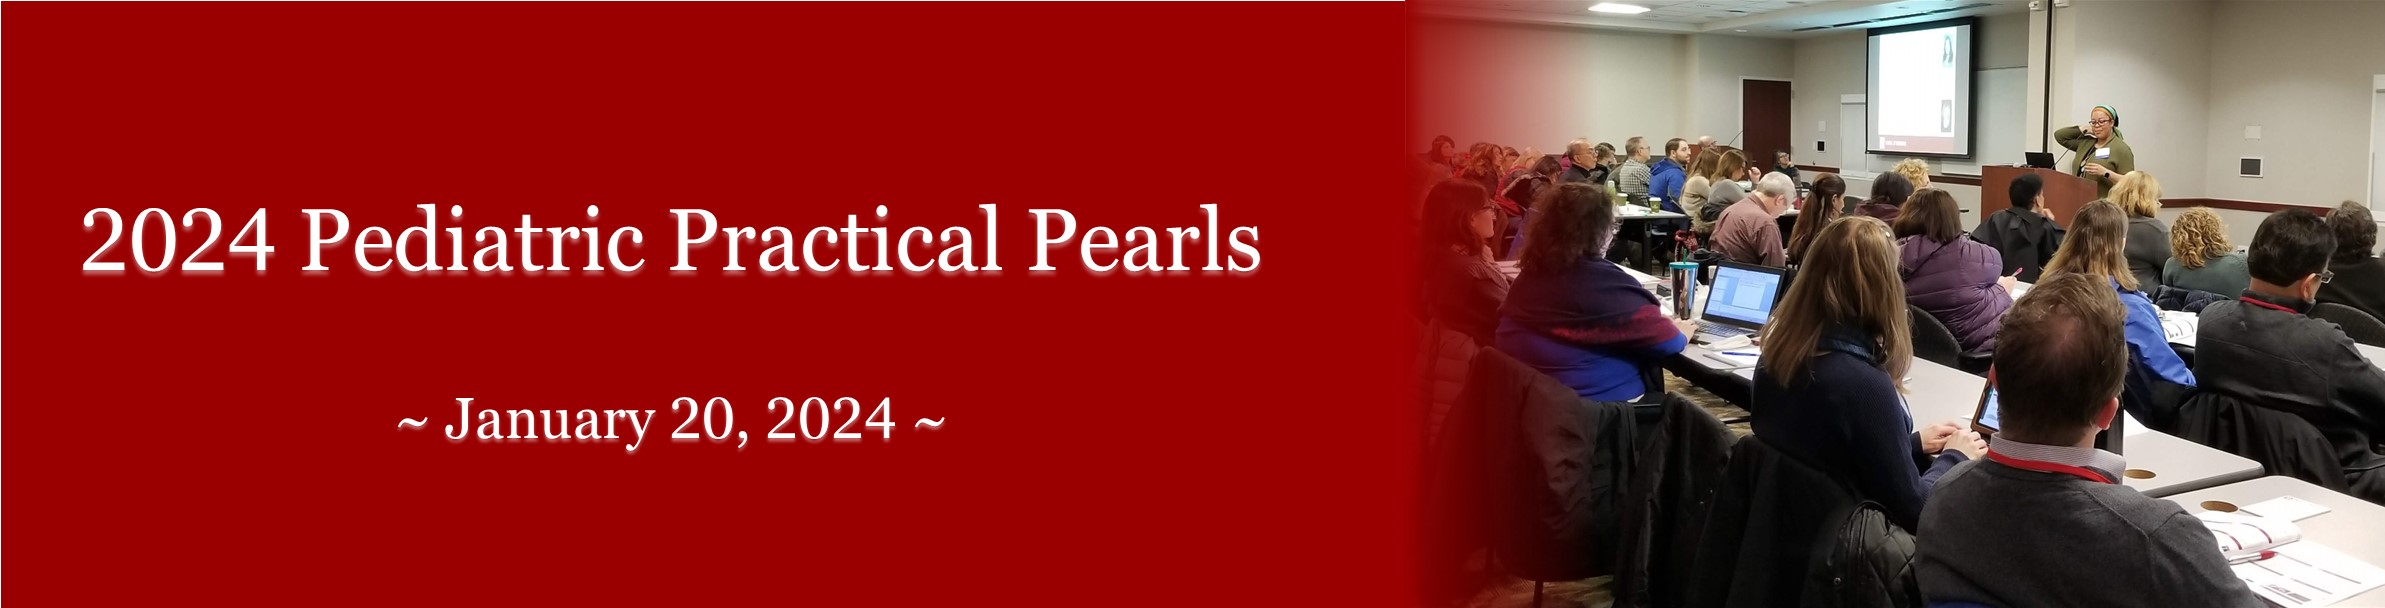 January 2024 Pediatric Practical Pearls Conference Baby Steps to New